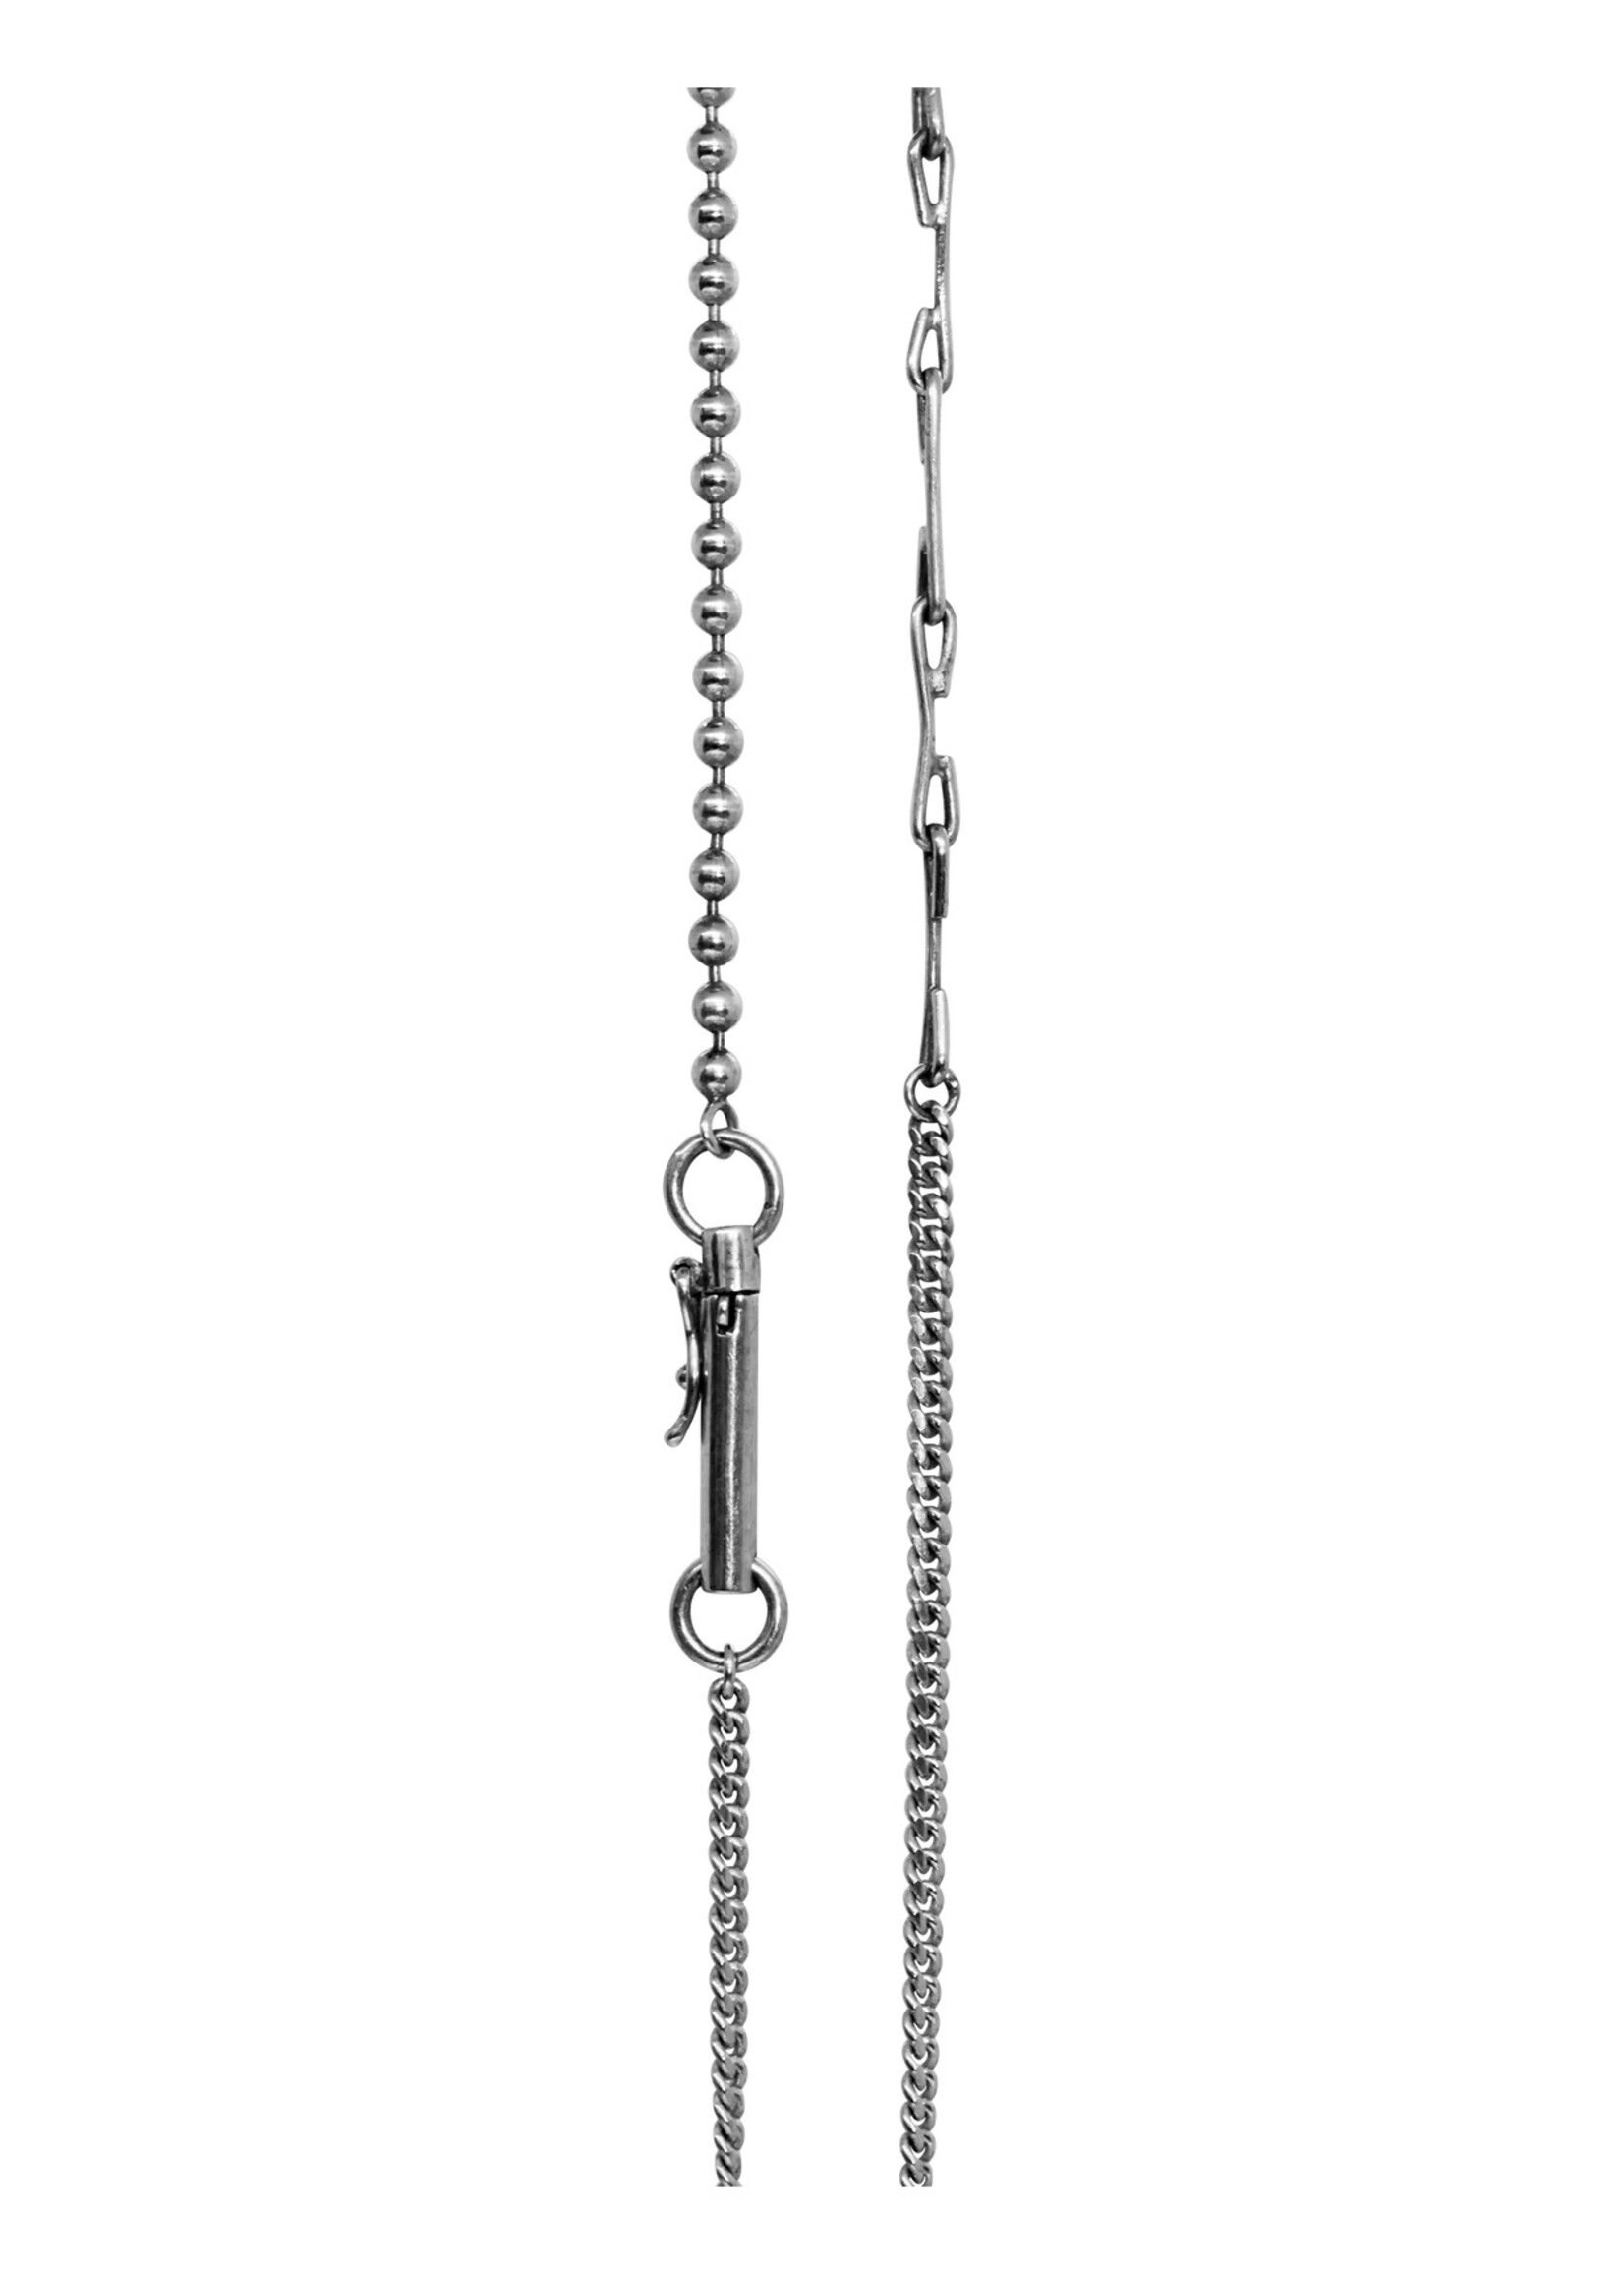 VARON Grapas Mix Chain Necklace in Sterling Silver